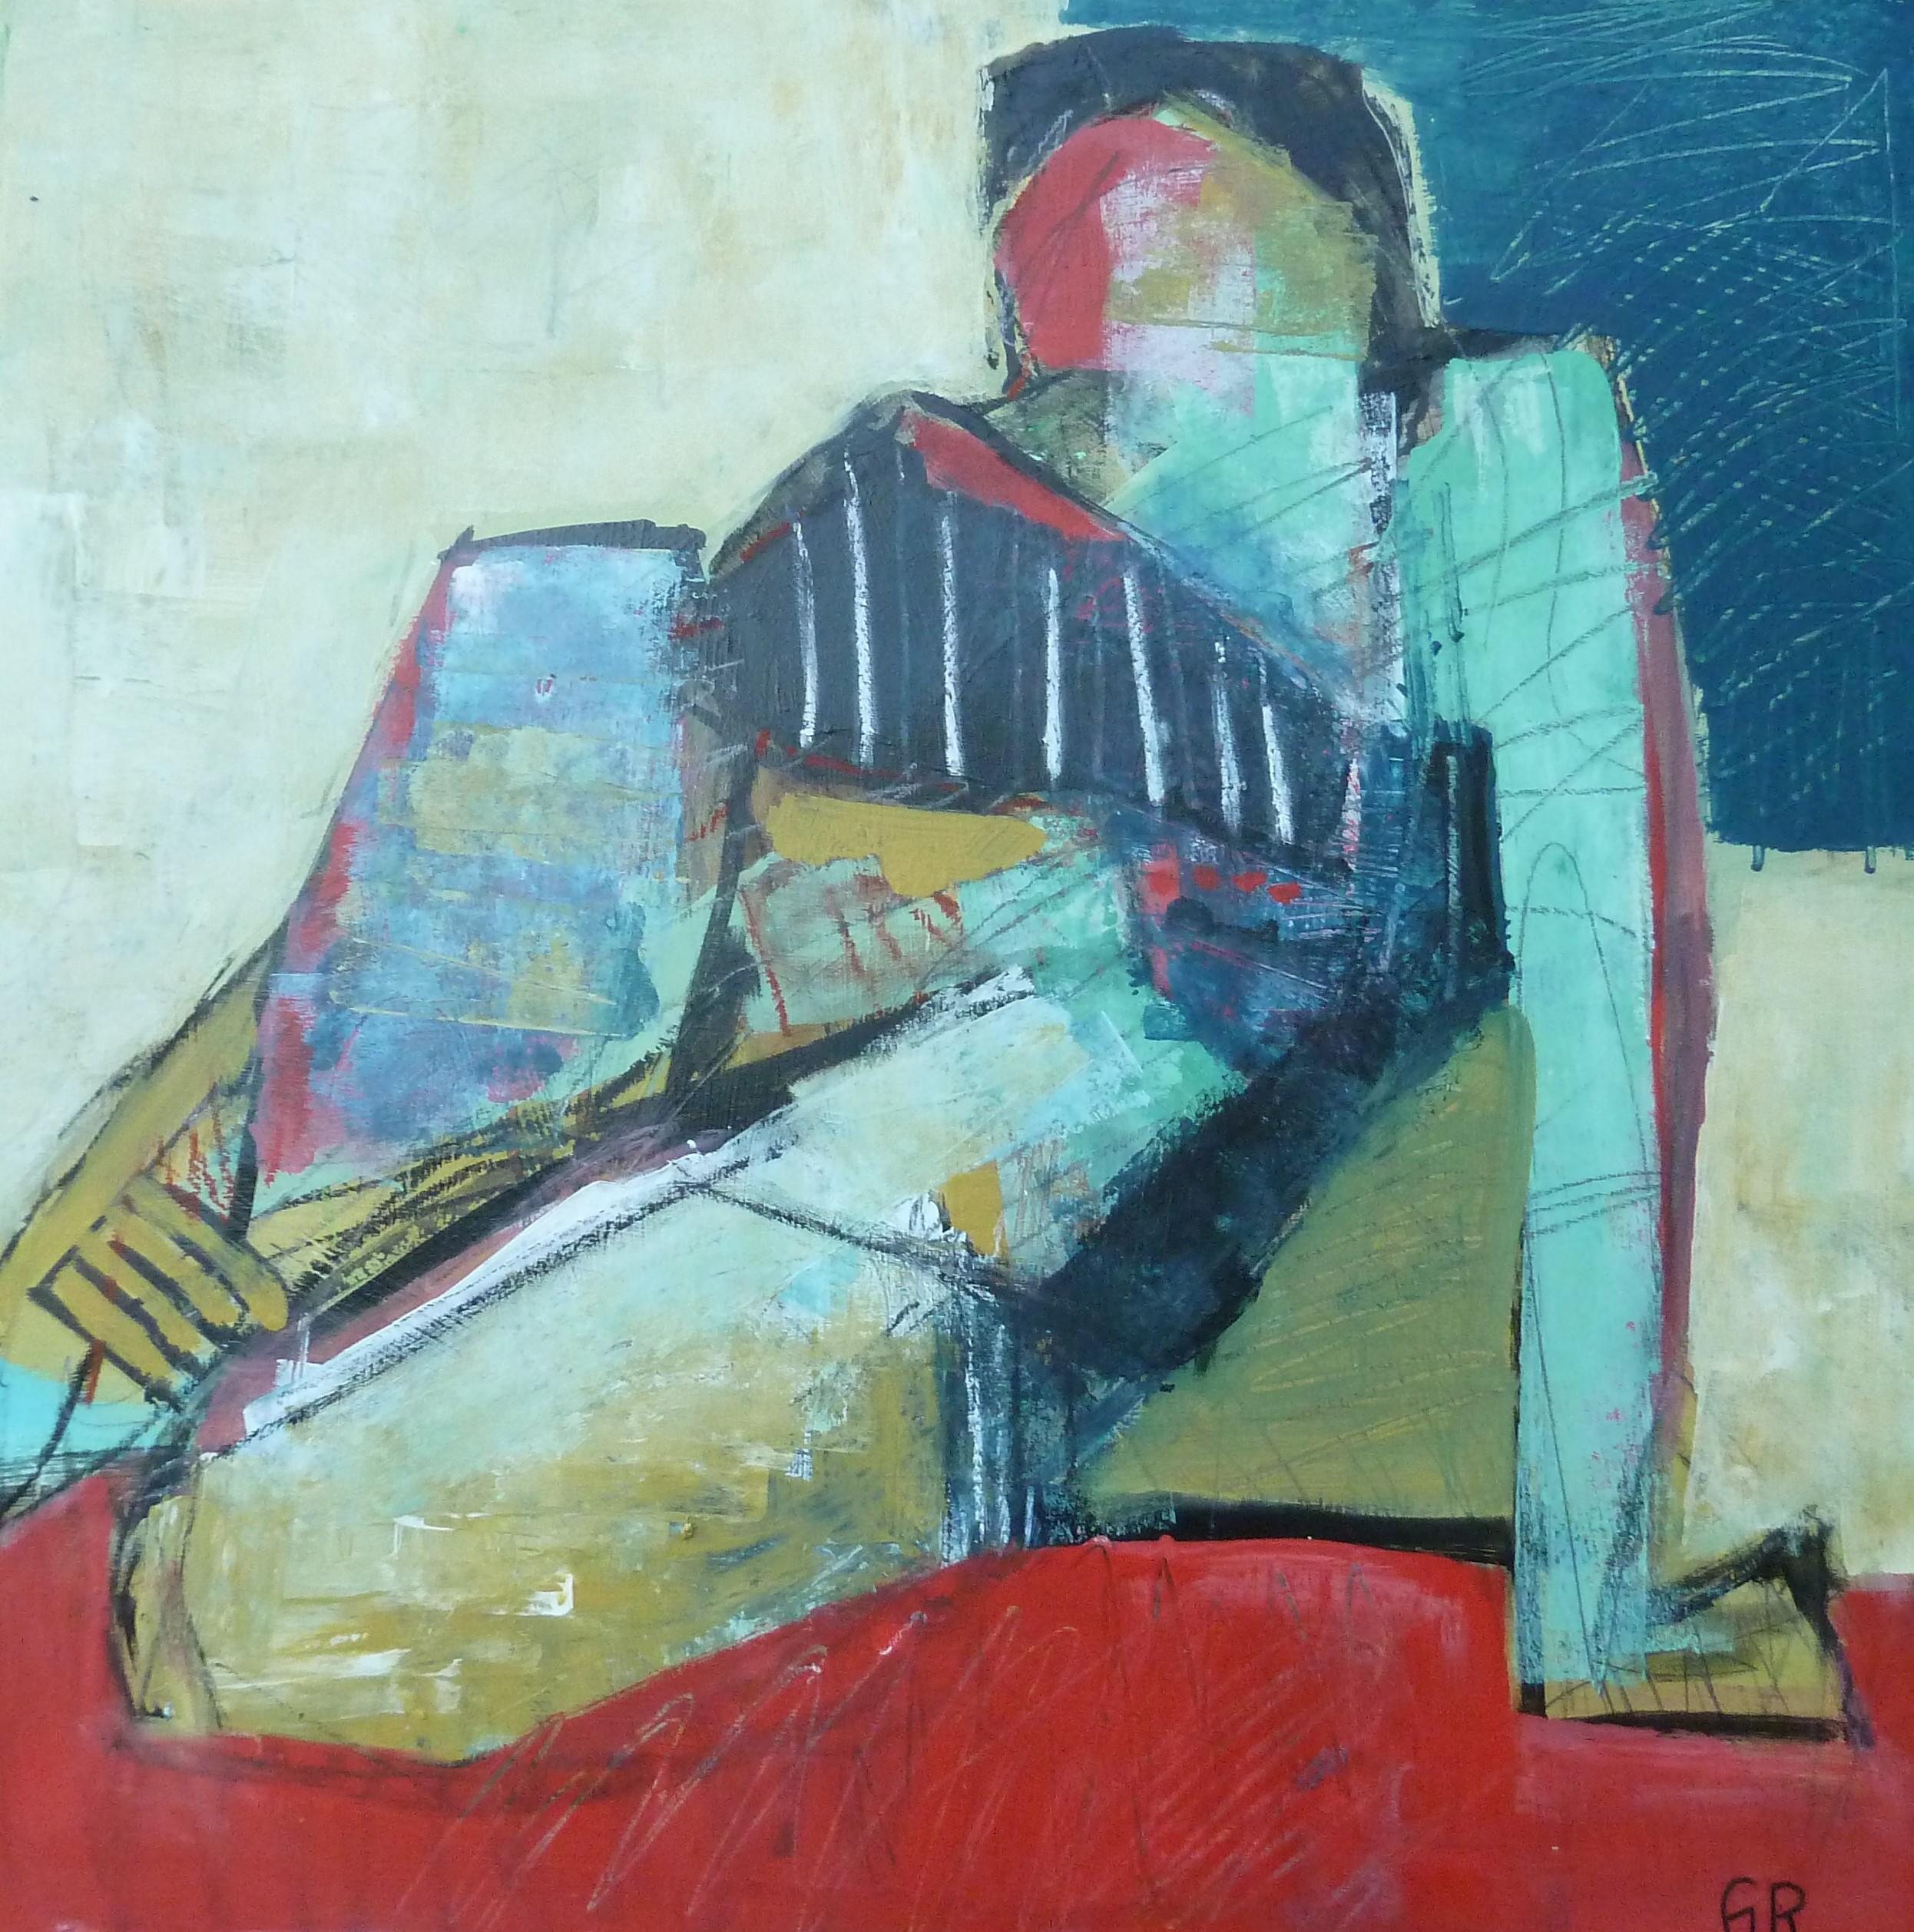 <p>Artist Comments<br>An abstract rendition of a reclining female figure in tones of teal, red, olive, and dark blue by artist Gail Ragains. The woman poses in one hand with her legs folded under. "The use of colors is very provocative and strong,"